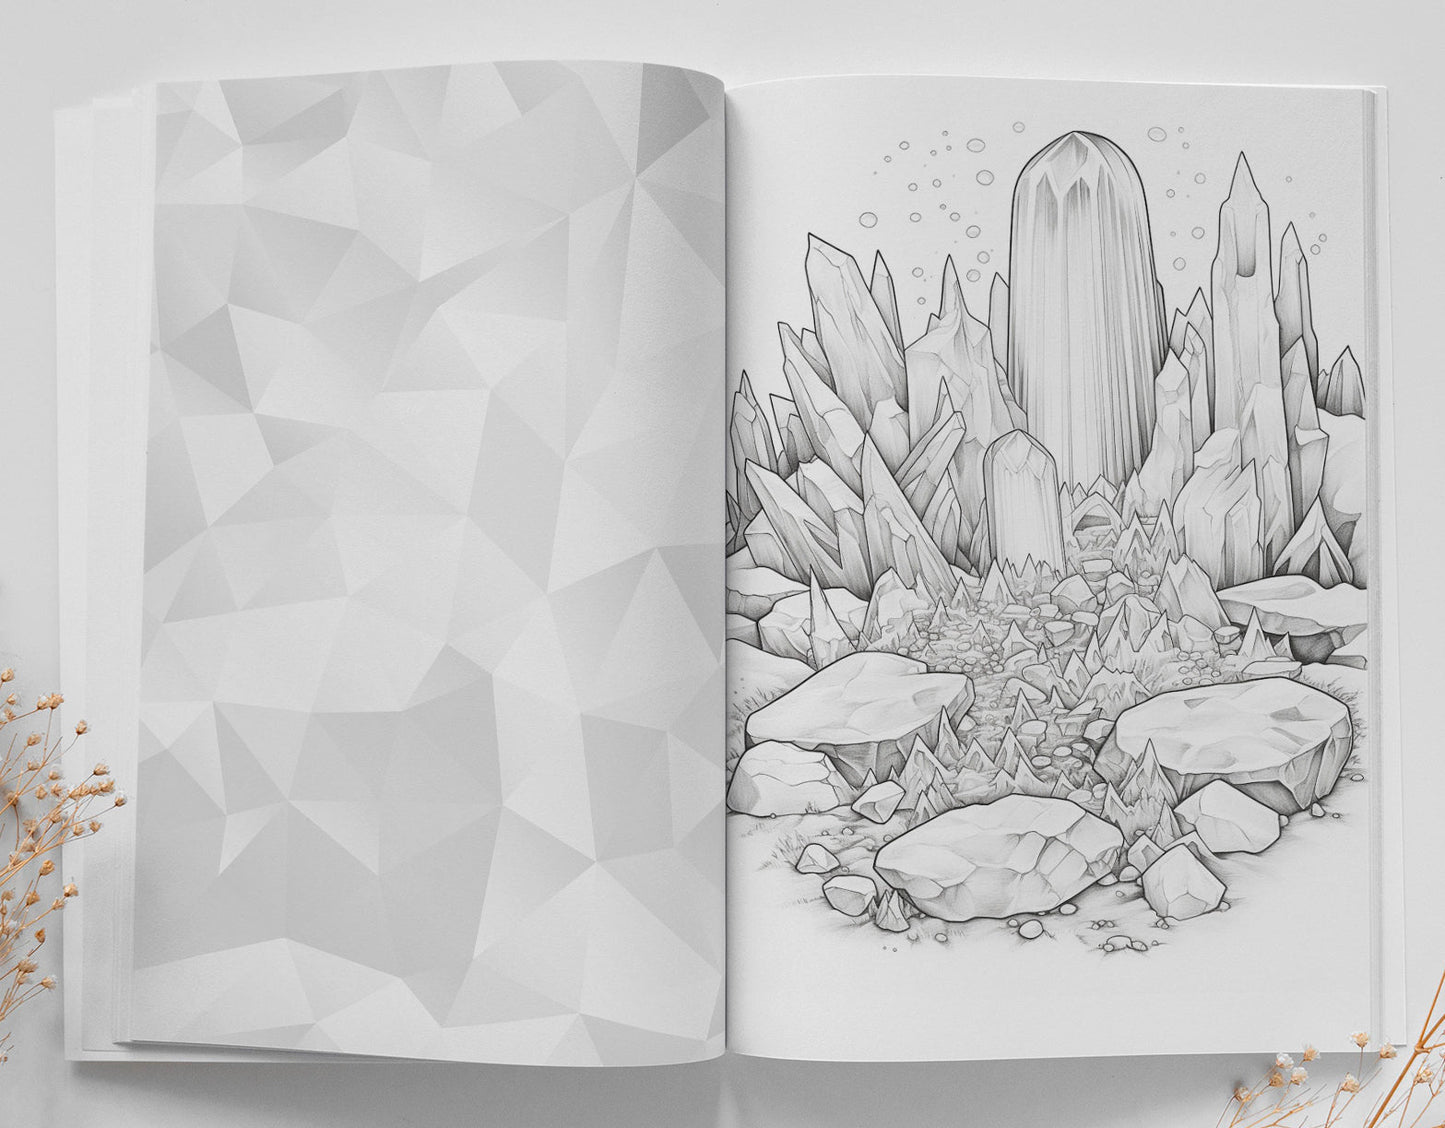 Crystals Coloring Book Grayscale (Digital) - Monsoon Publishing USA